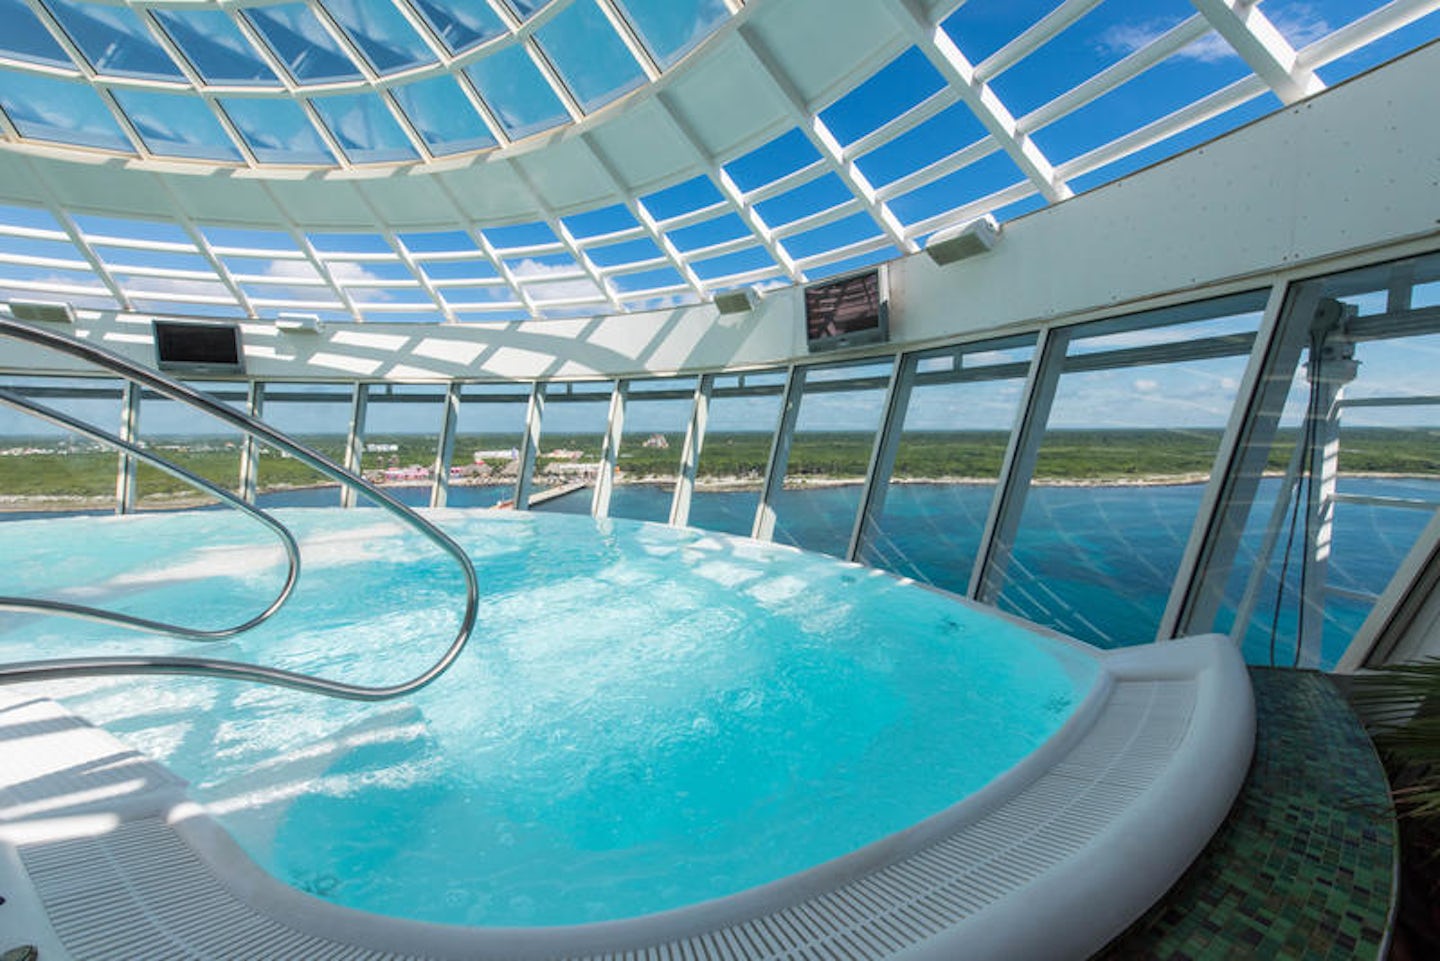 The Whirlpools on Oasis of the Seas